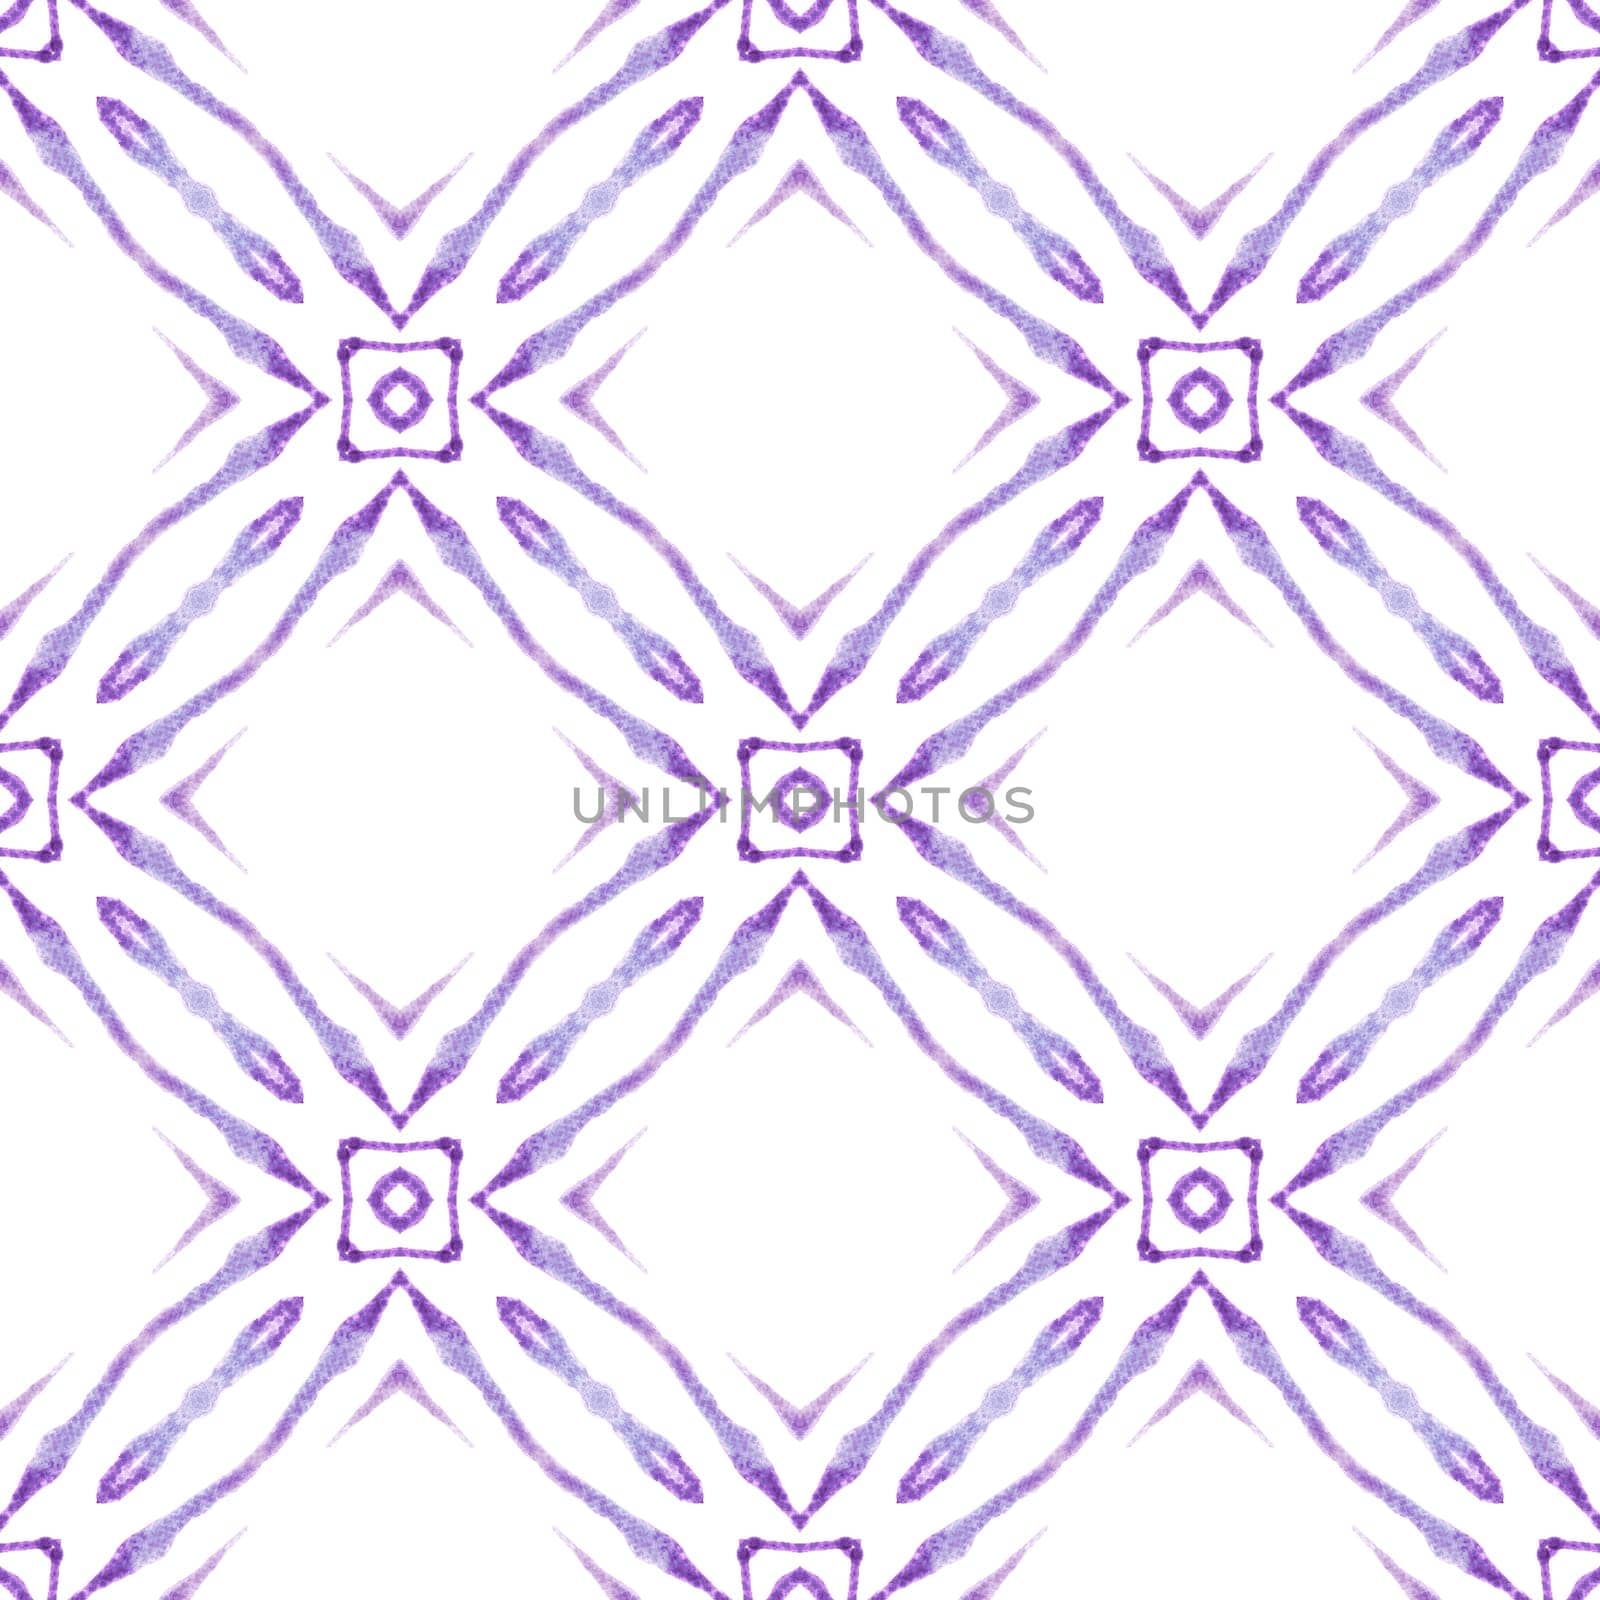 Watercolor medallion seamless border. Purple overwhelming boho chic summer design. Textile ready magnetic print, swimwear fabric, wallpaper, wrapping. Medallion seamless pattern.